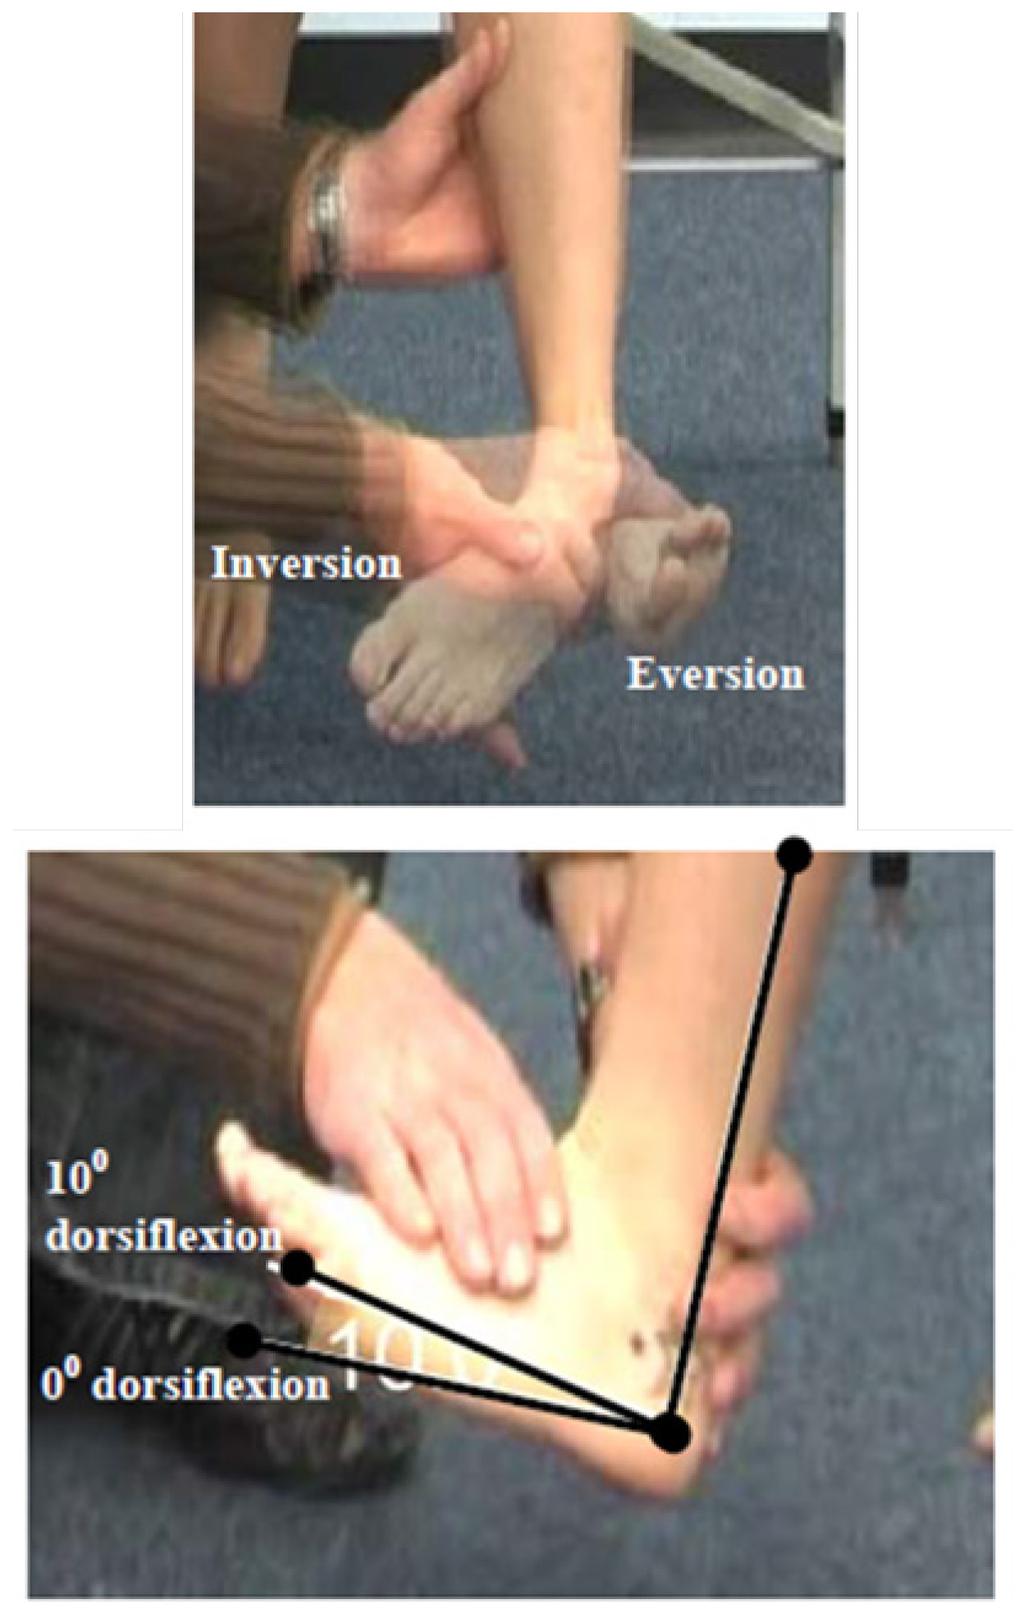 Primary Criterion #7 At least two of the following three muscle actions must have a loss of 3 points each: Ankle Dorsiflexion, Ankle Eversion, and Ankle Inversion.